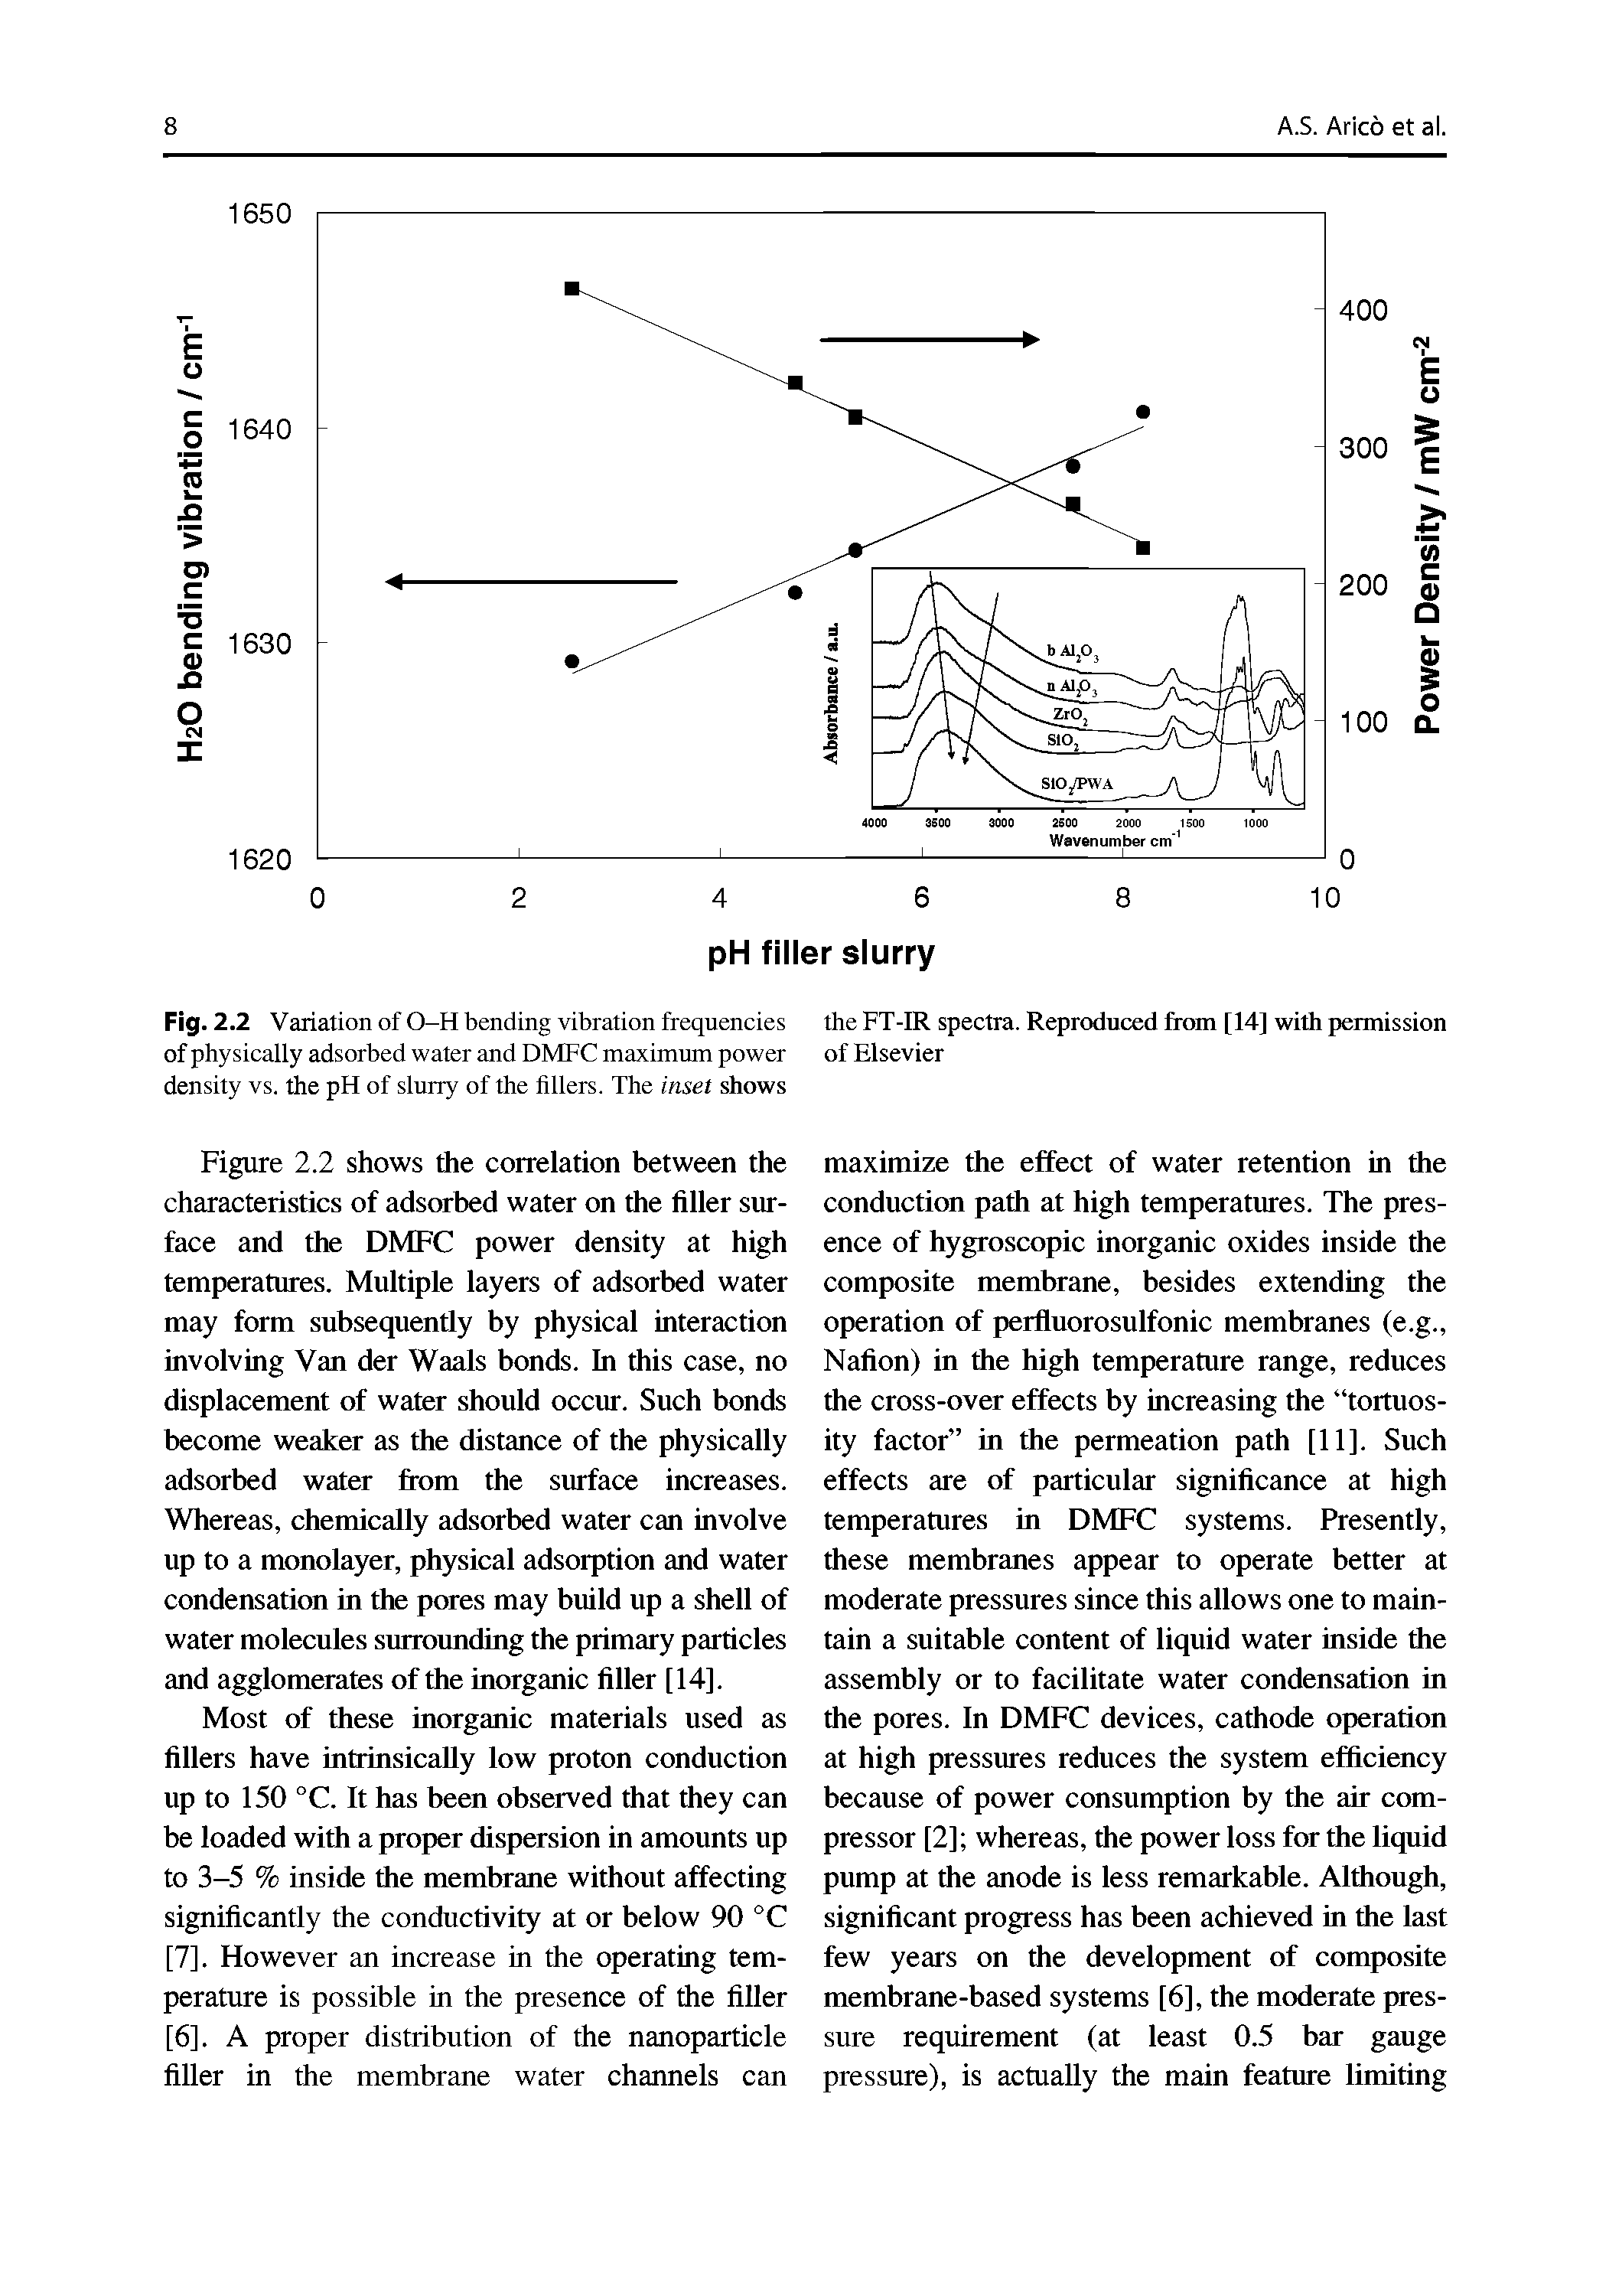 Fig. 2.2 Variation of O-H bending vibration frequencies of physically adsorbed water and DMFC maximum power density vs. the pH of slurry of the fillers. The inset shows...